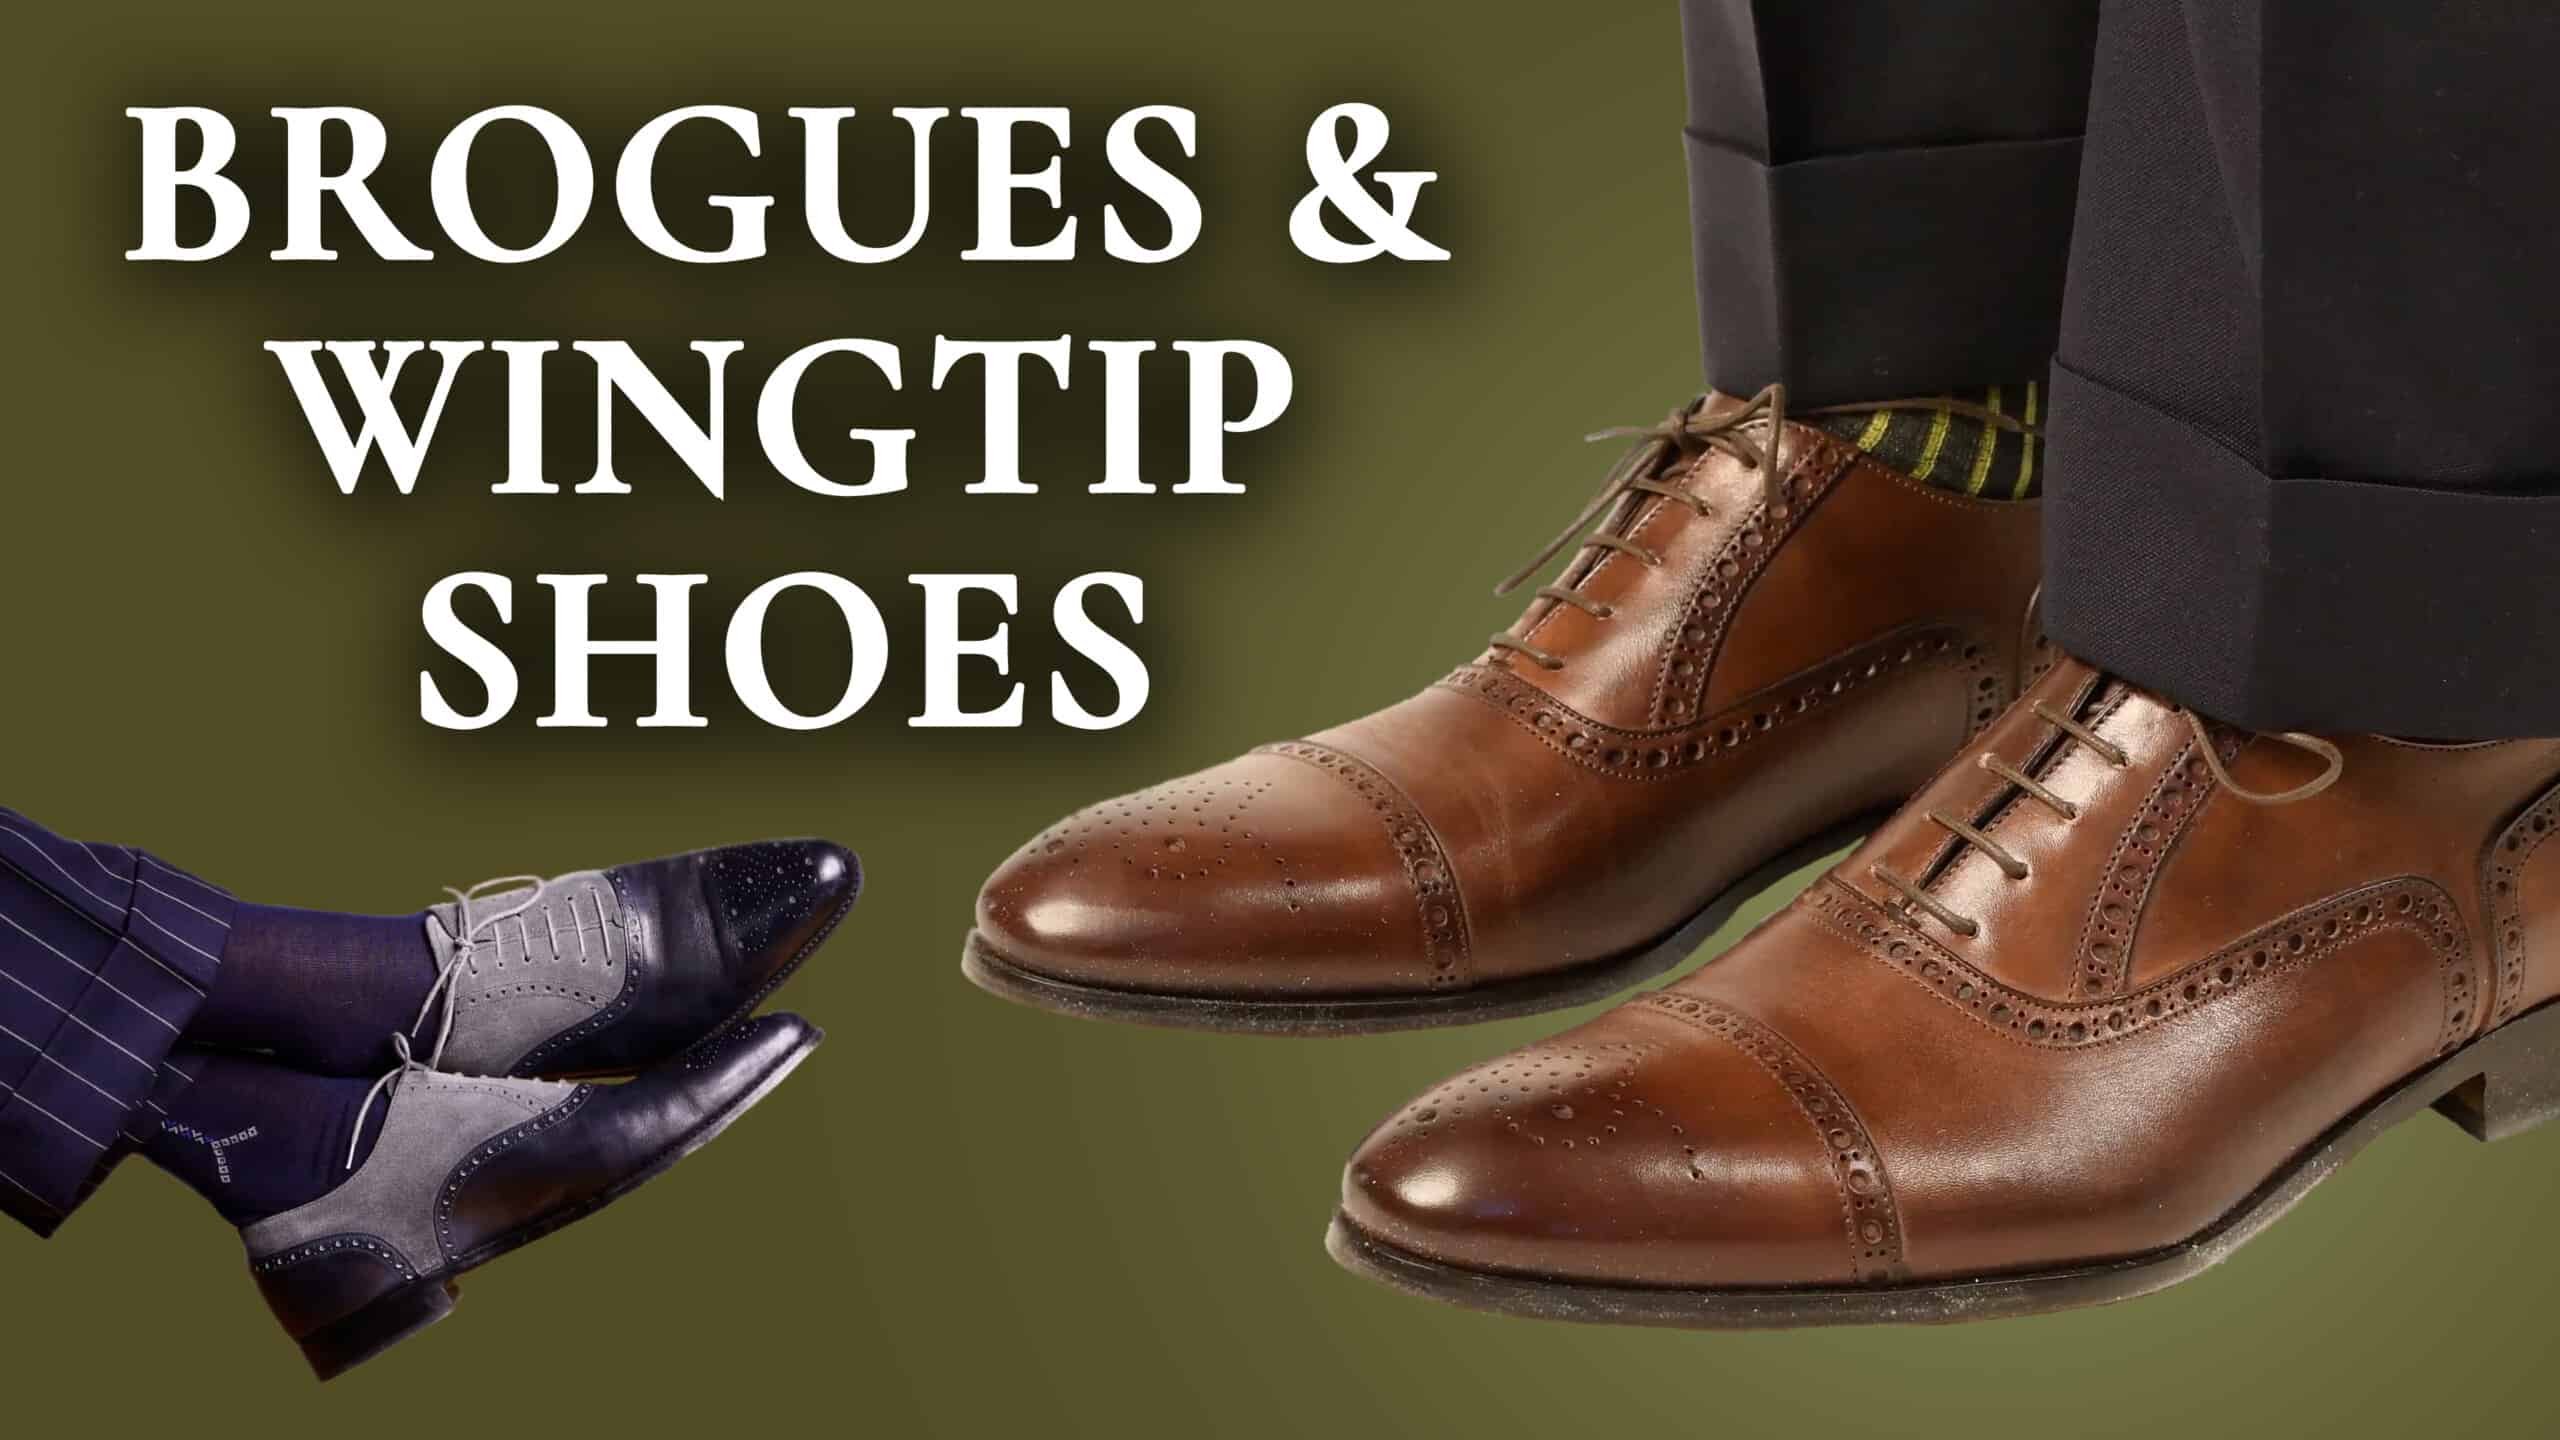 brogues wingtips 3840x2160 wp scaled